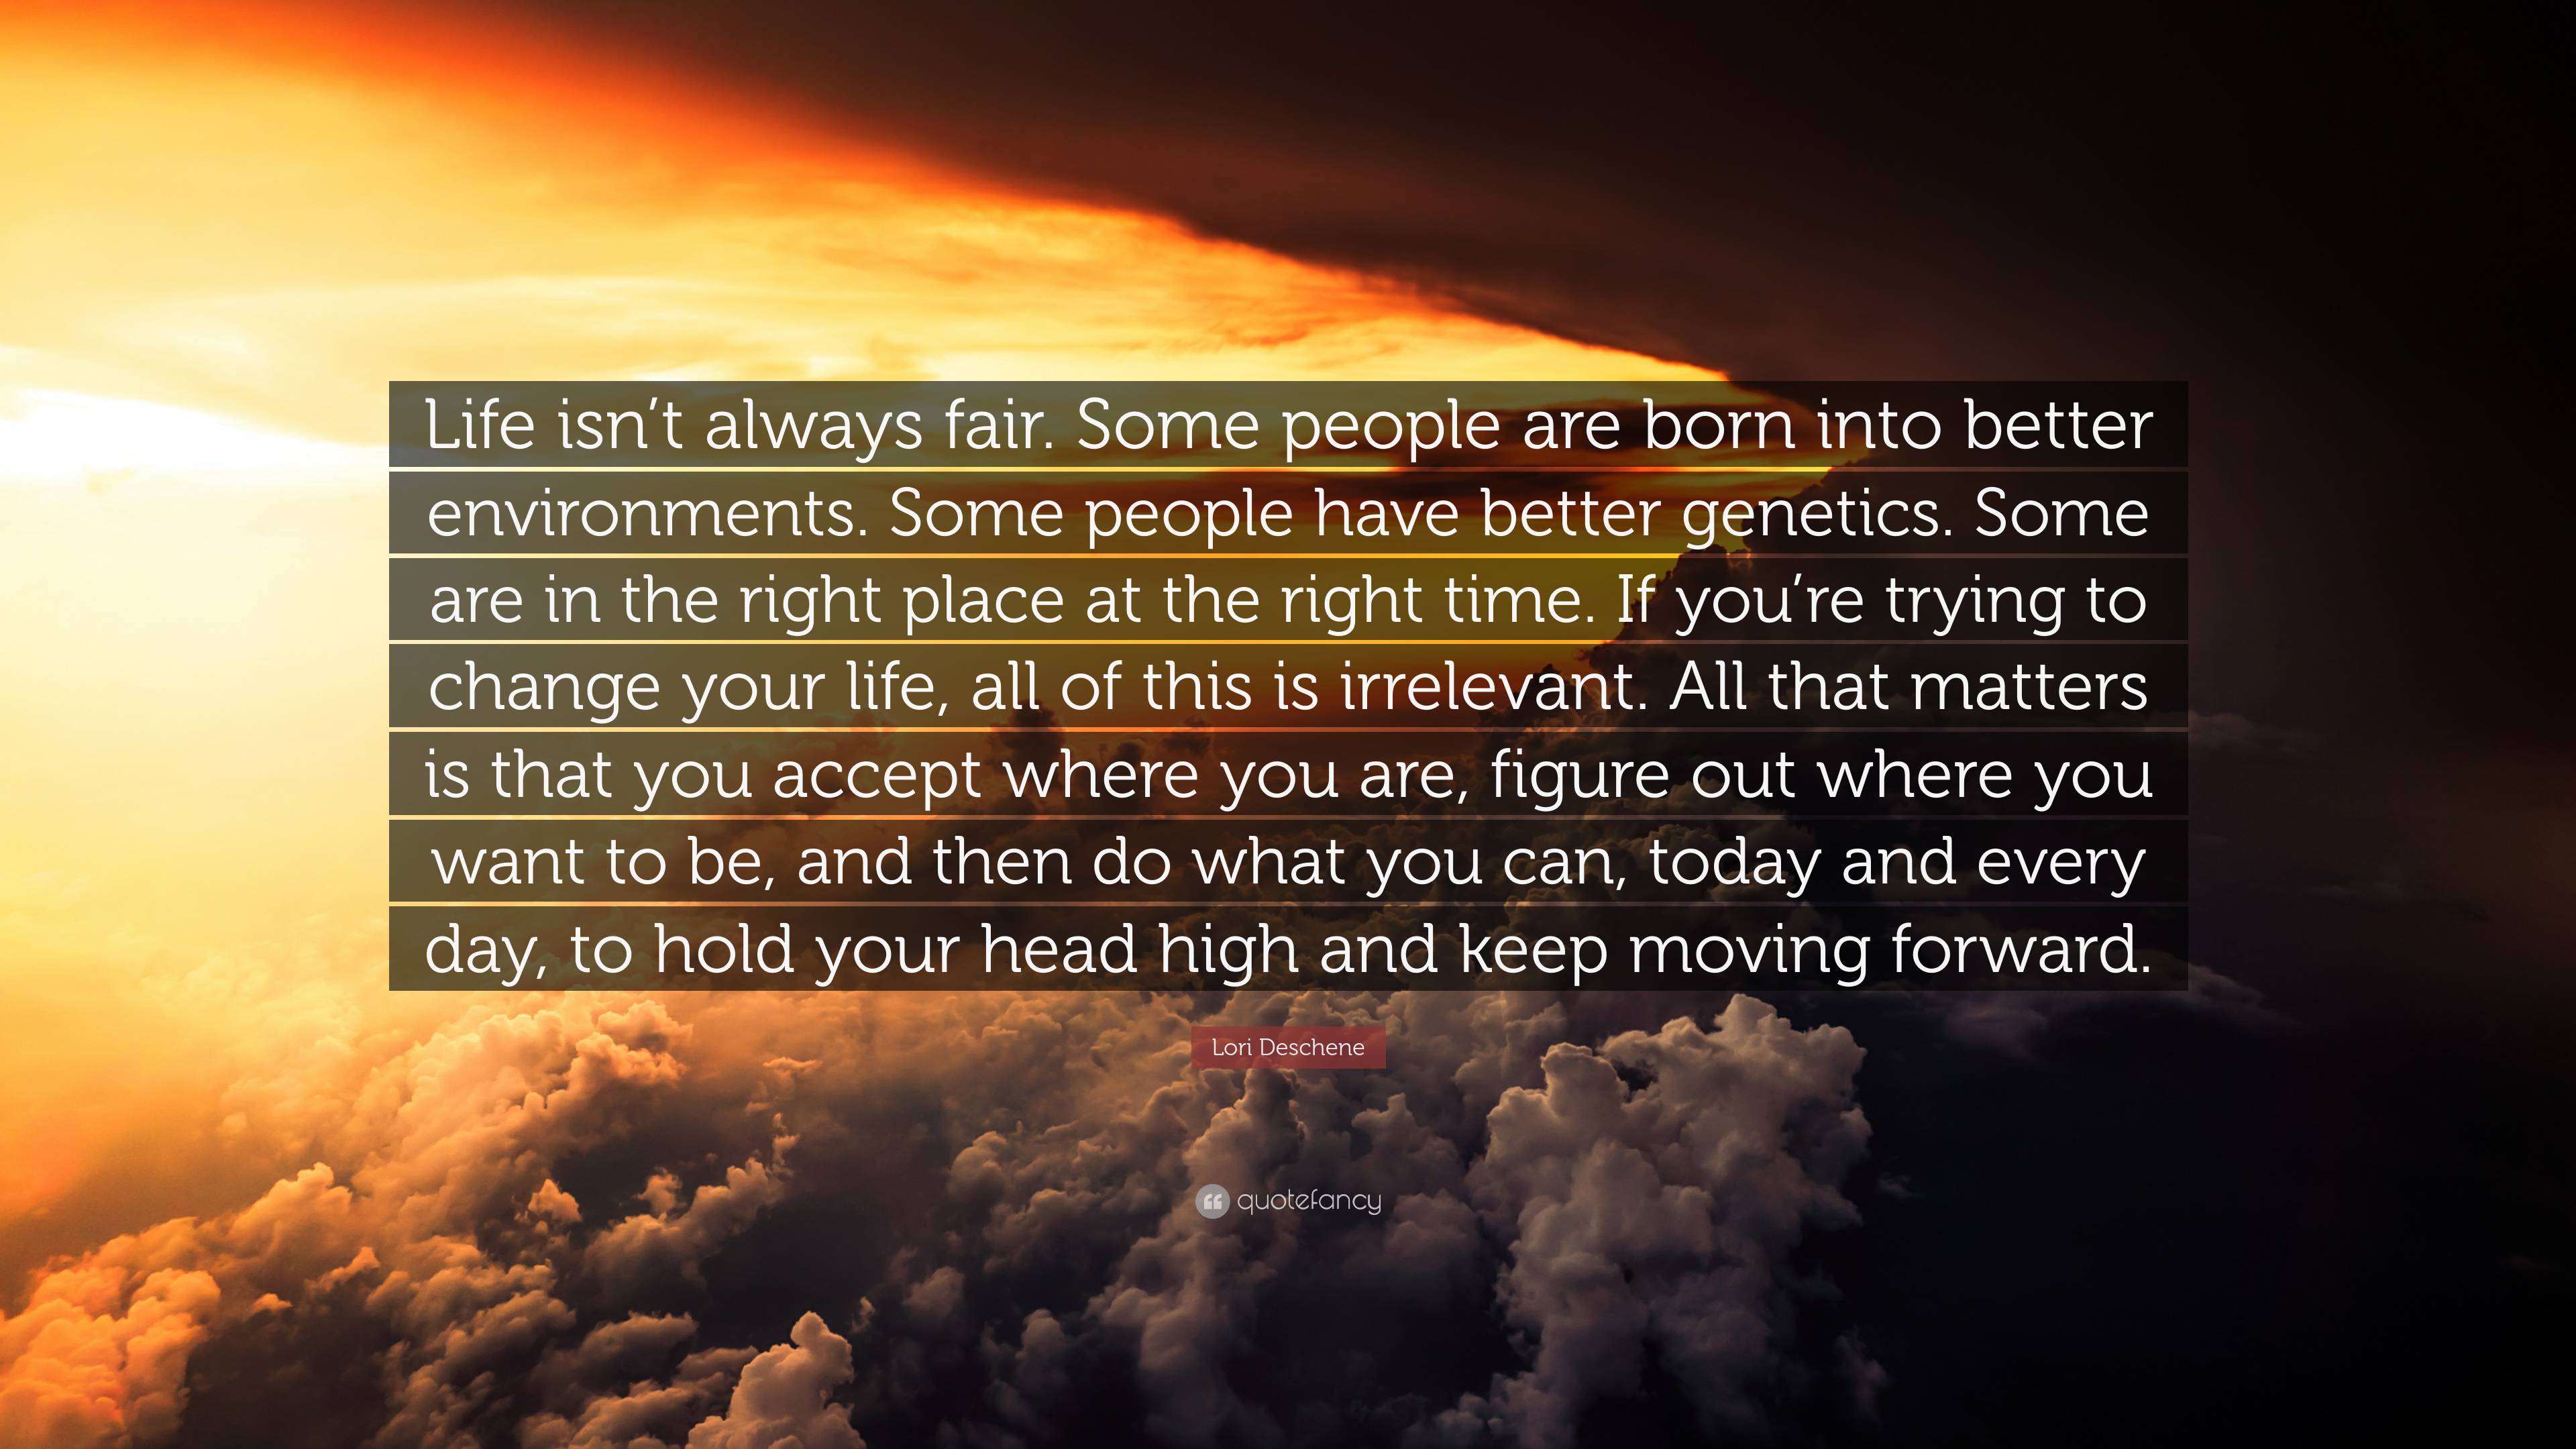 Lori Deschene Quote: “Life isn’t always fair. Some people are born into ...